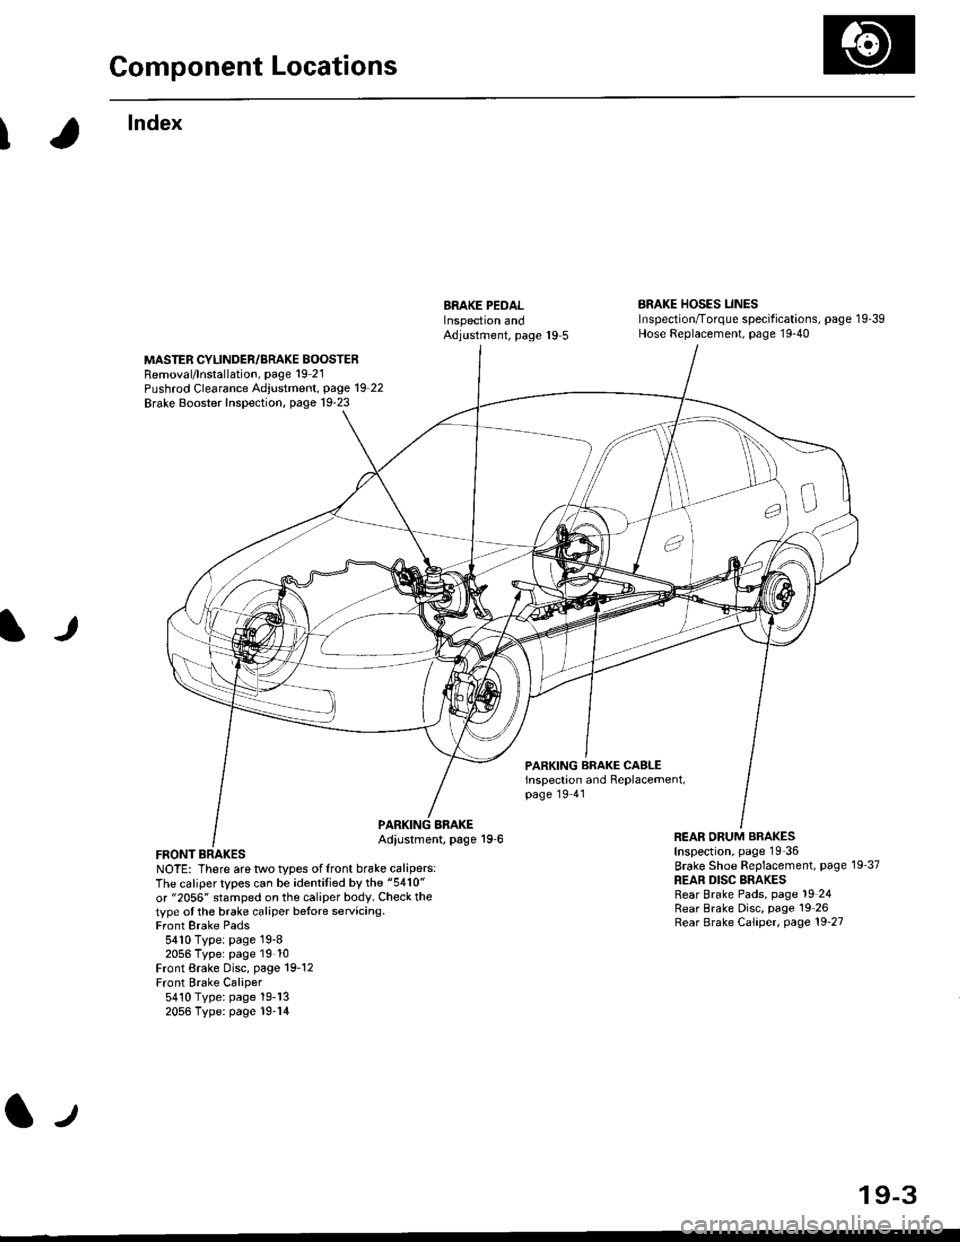 HONDA CIVIC 1996 6.G Owners Guide Component Locations
I
lndex
ERAKE PEDALInspectron andAdjustment, page 19 5
BRAKE HOSES LINESInspection/Torque specif ications, page 1 9-39Hose Replacement, page 19-40
MASTER CYLINDER/BRAKE BOOSTERRemo